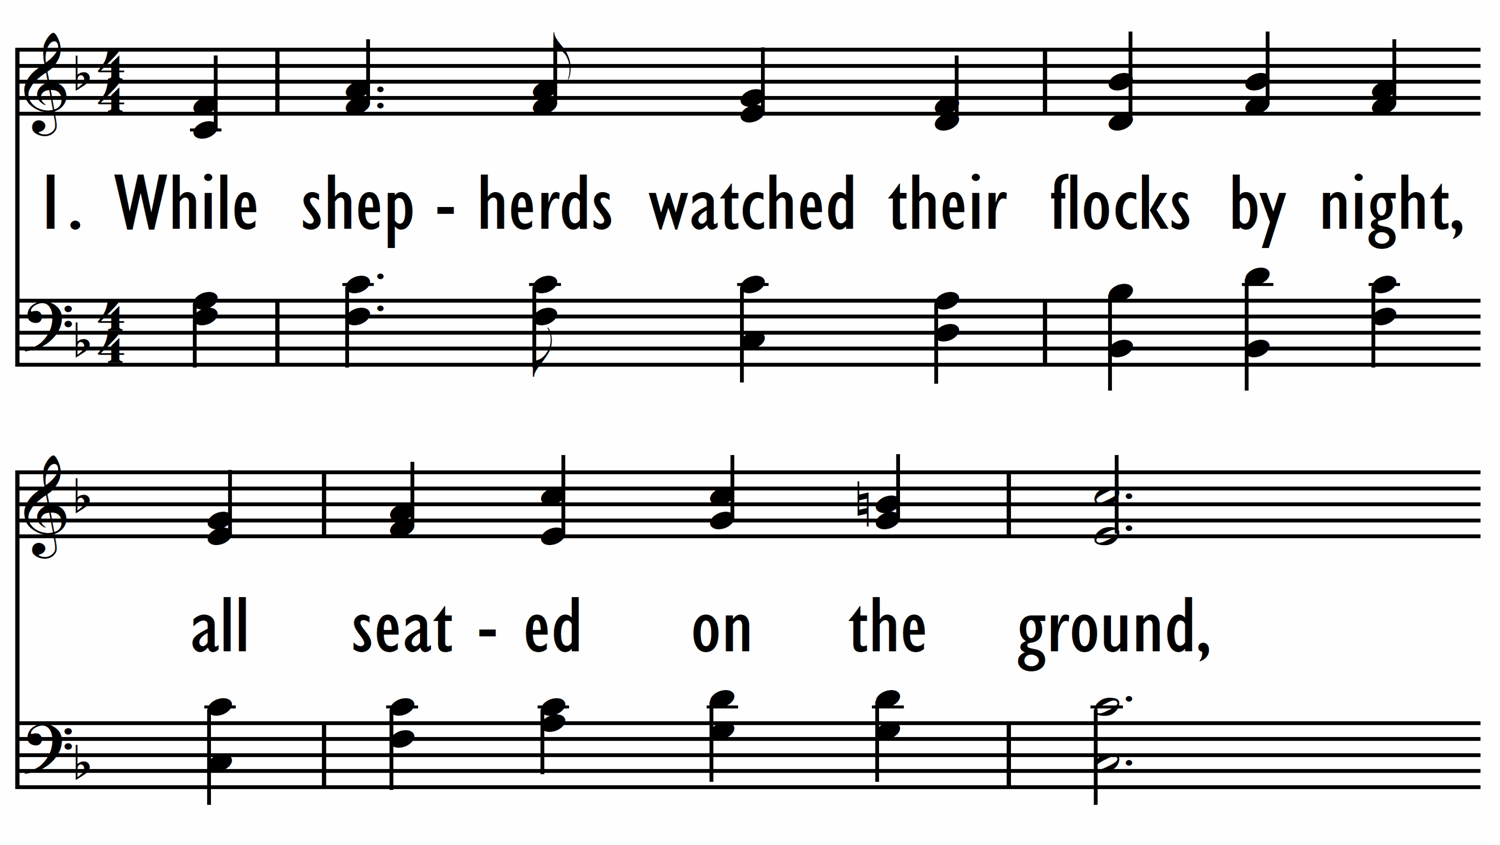 WHILE SHEPHERDS WATCHED THEIR FLOCKS (with descant)-ppt